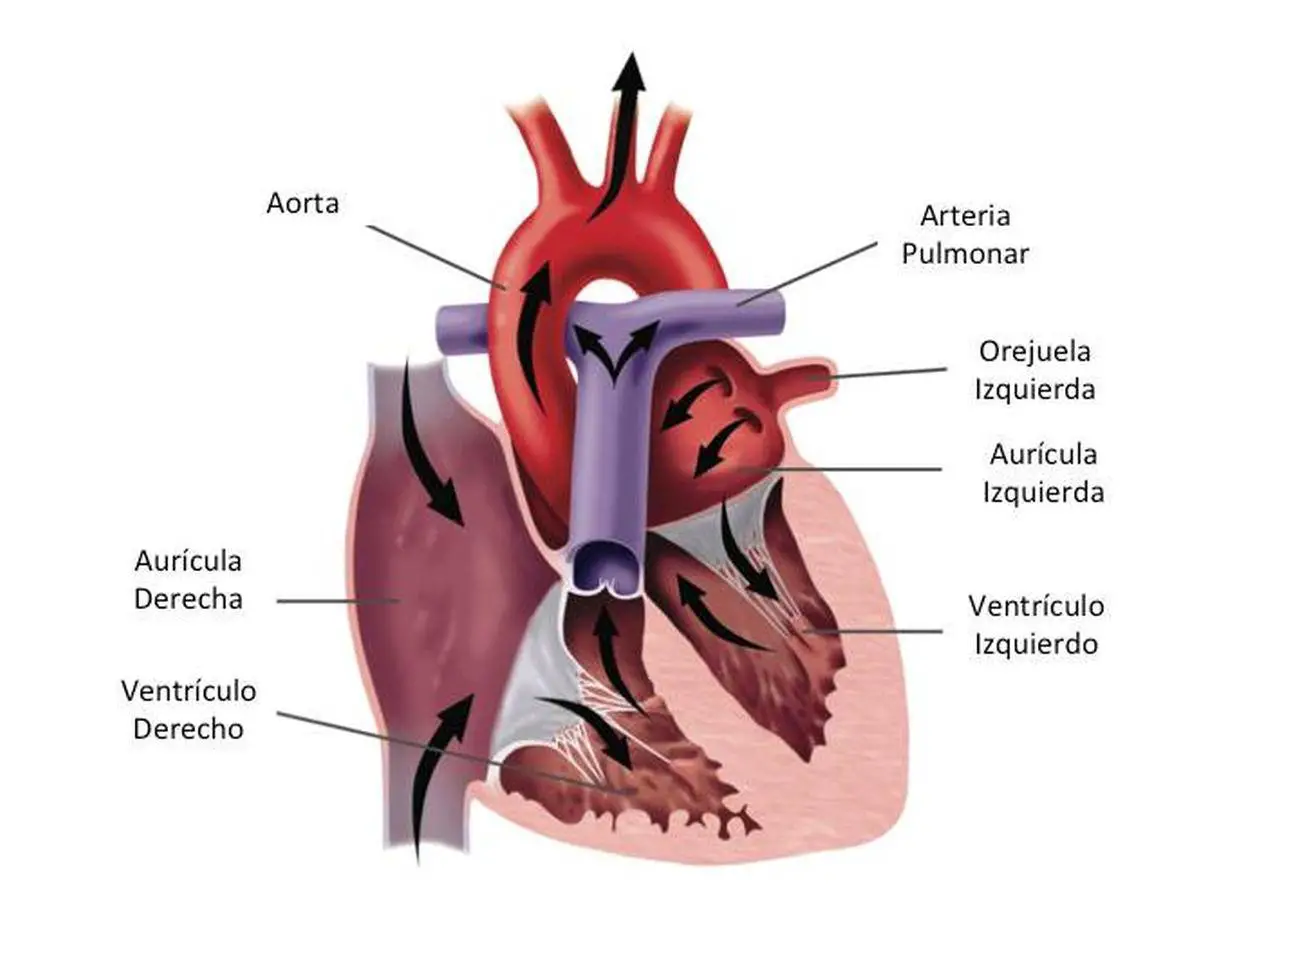 Pictures Of Atrial Appendage (auricle)